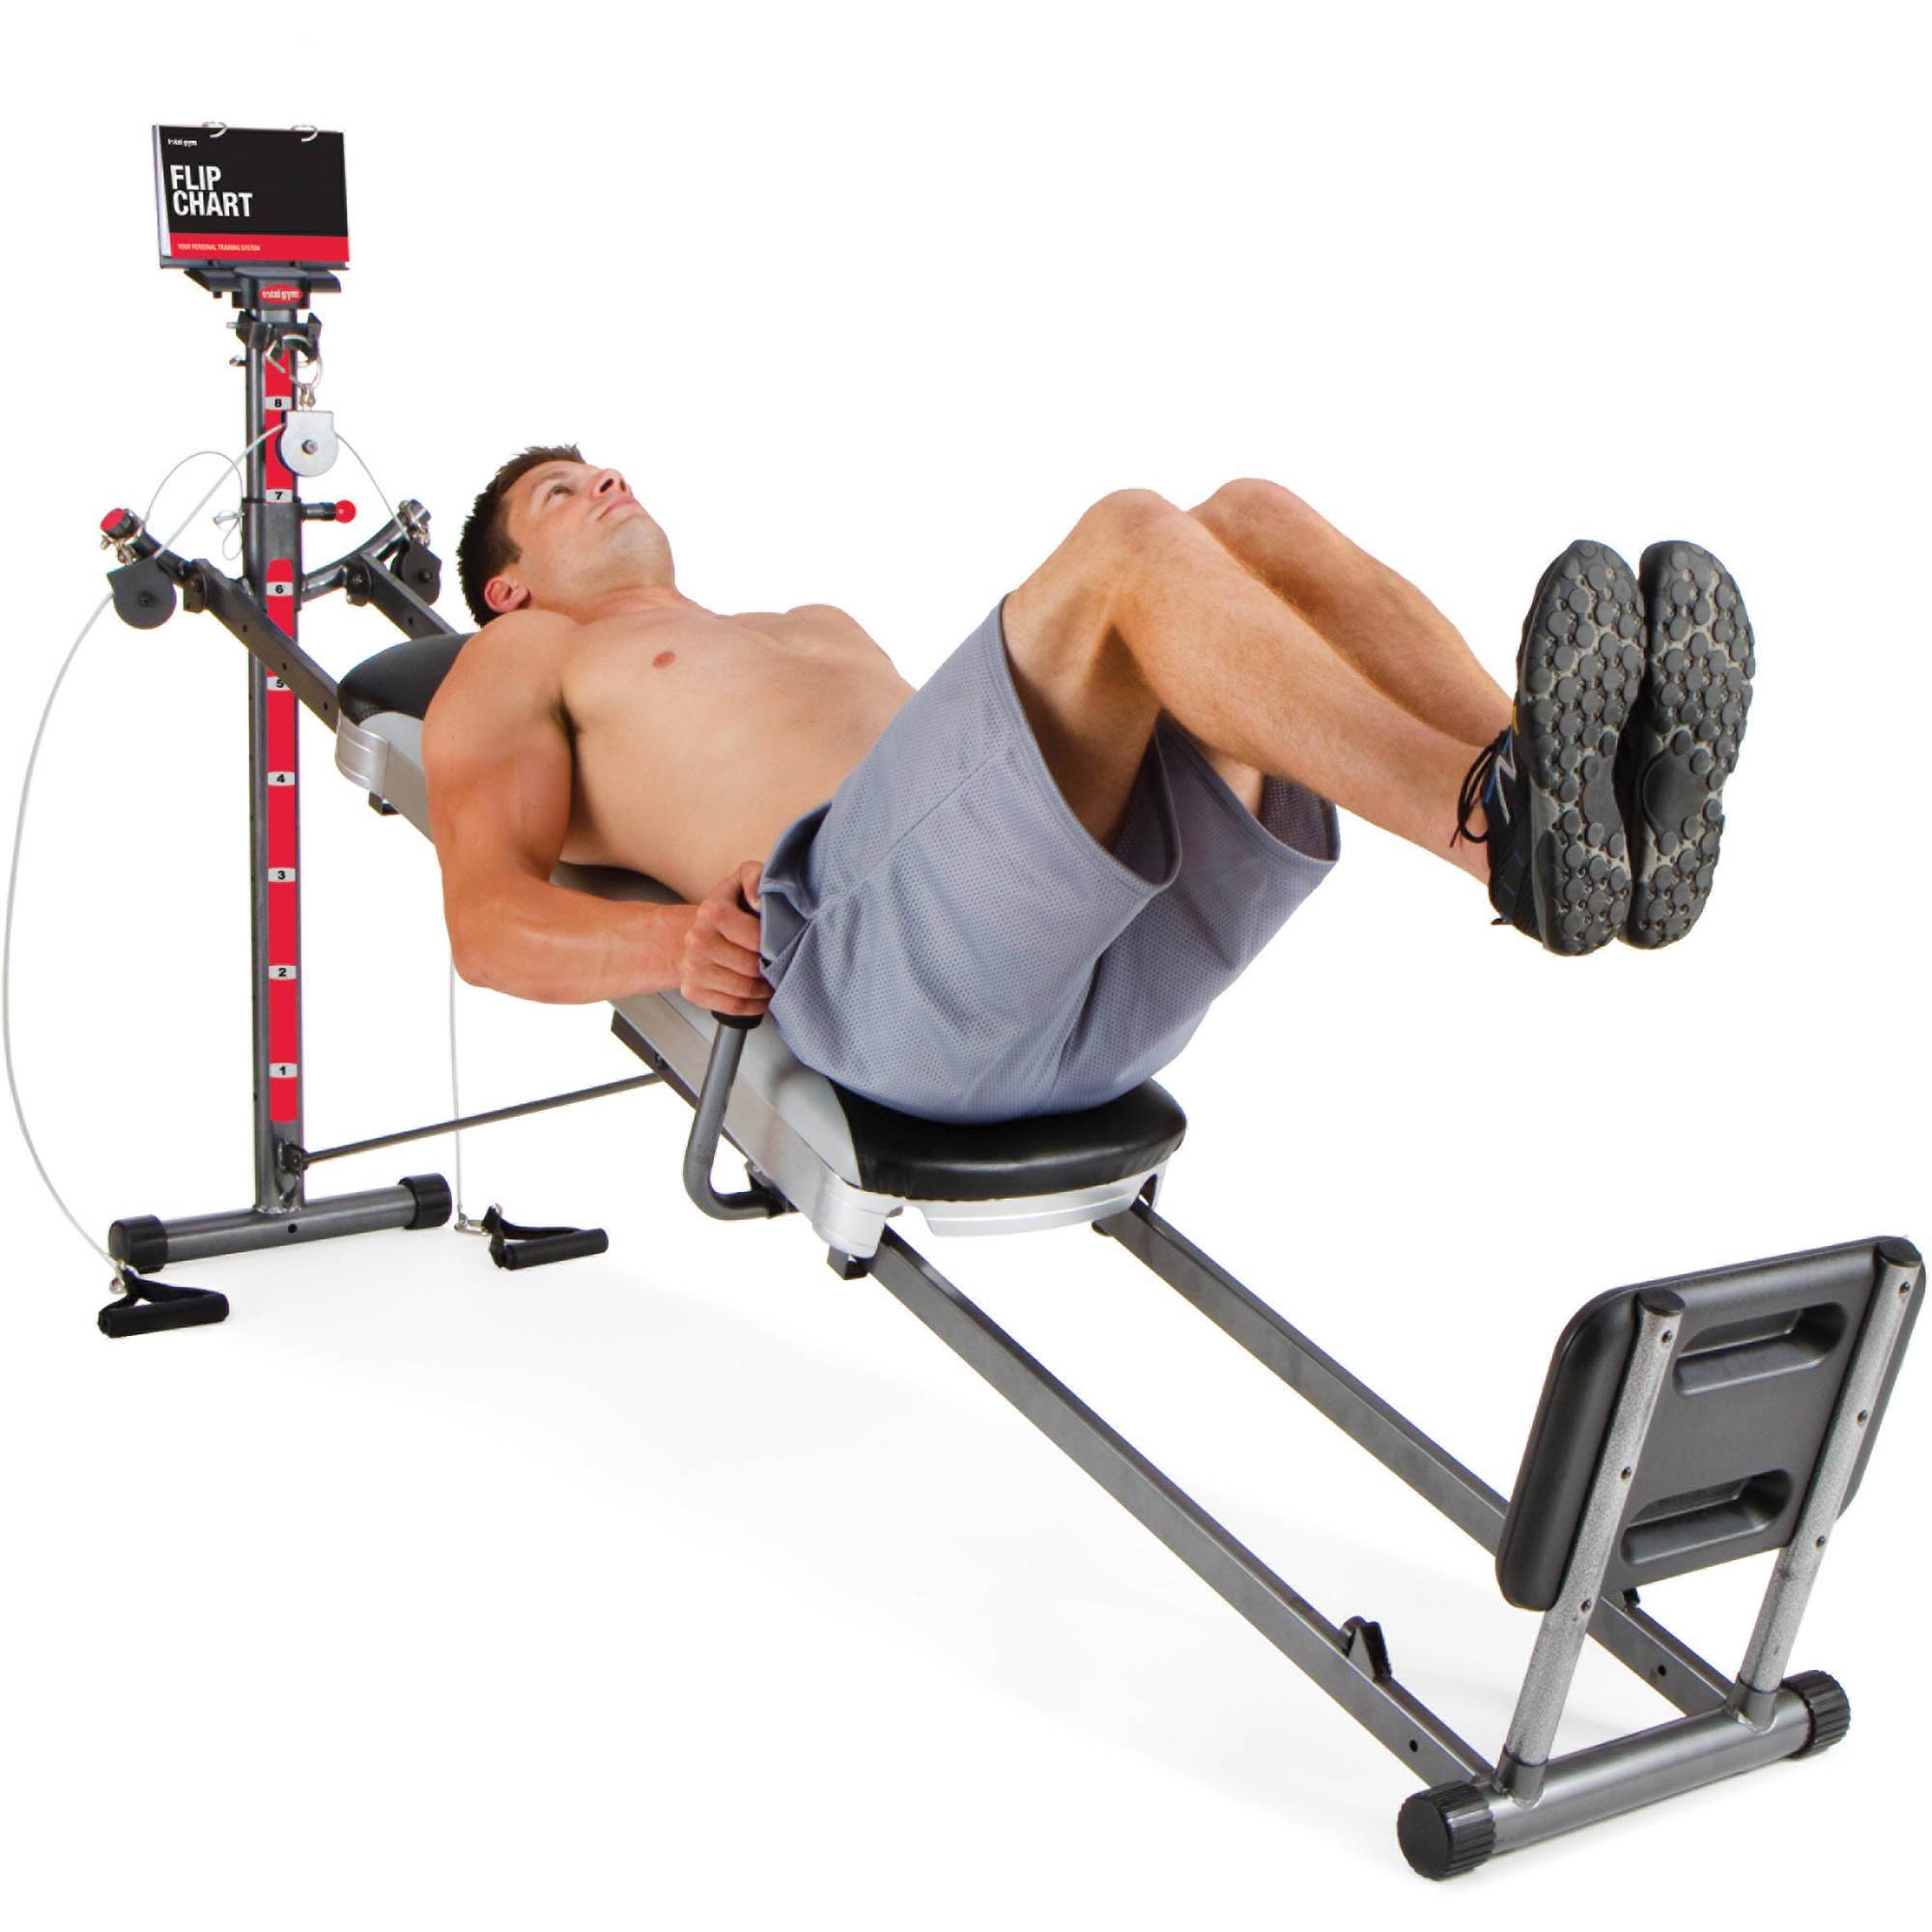 Total Gym 1400 Deluxe Home Fitness Exercise Machine Equipment with Workout DVD - image 11 of 15